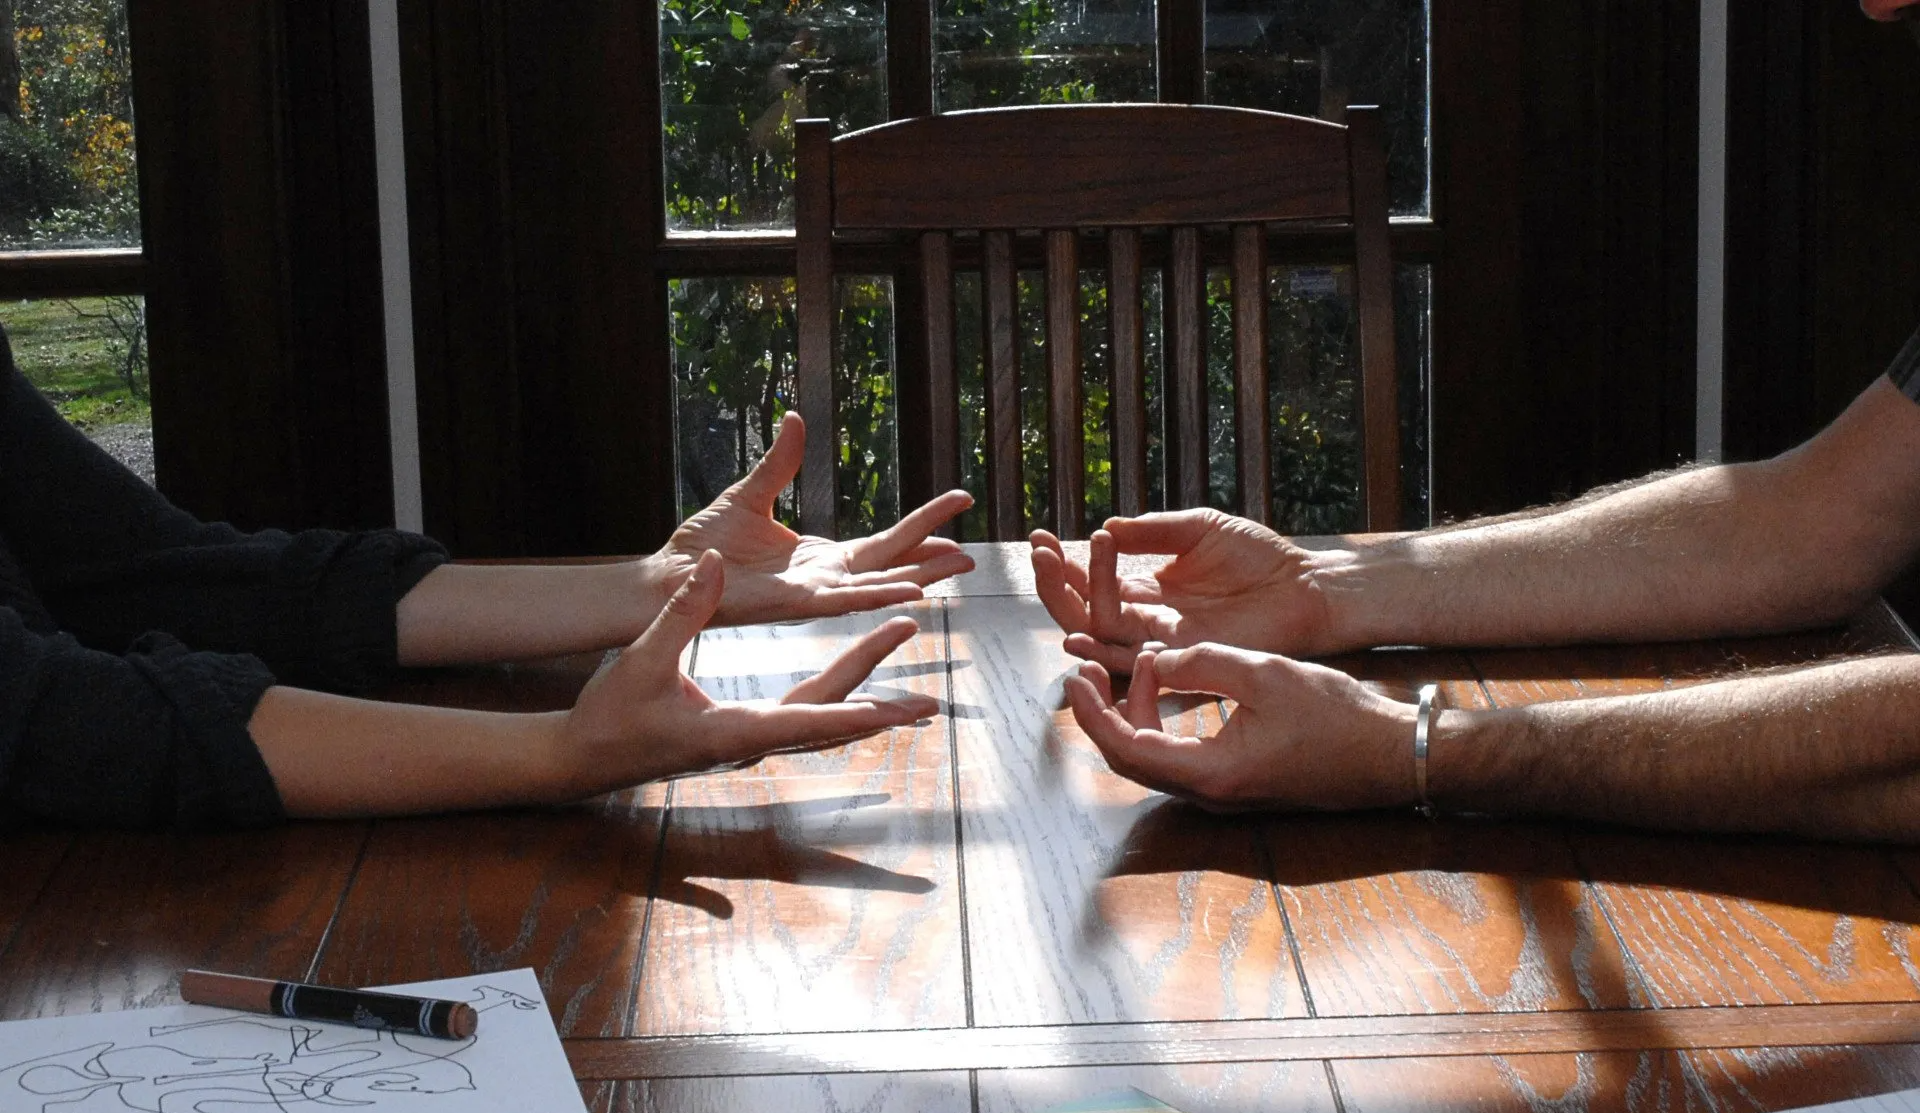 Two people are sitting at a table with their hands outstretched